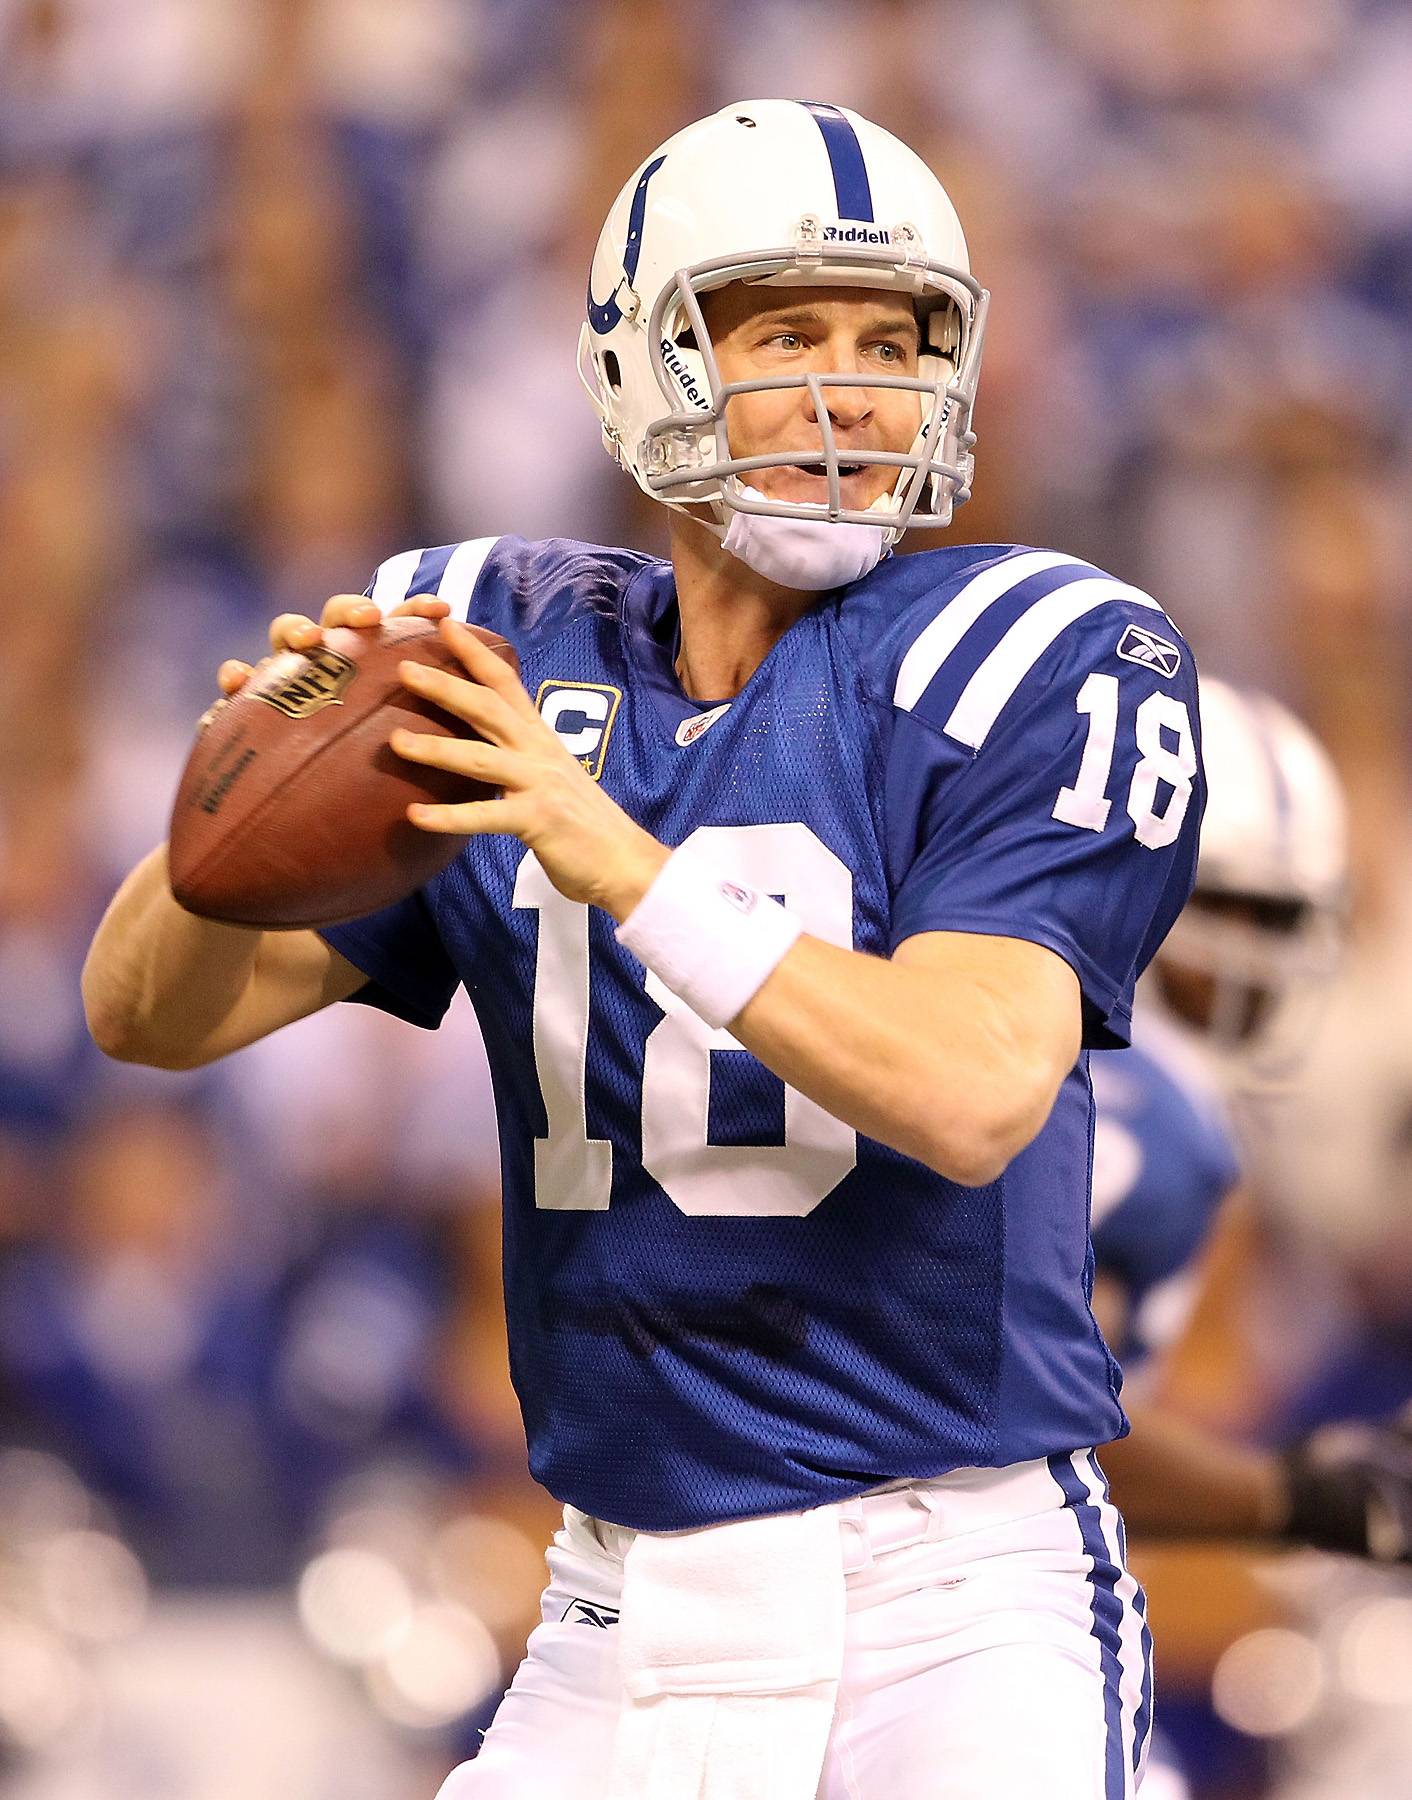 Here Today, Gone Tomorrow - In light of Peyton Manning's departure from the Indianapolis Colts, BET.com takes a look at some other NFL stars who moved on from the teams that helped make them legendary.—Britt Middleton  The Colts announced on Wednesday that after 13 seasons they were releasing star quarterback Manning from his five-year, $90 million contract as the team couldn’t afford to pay his $28 million bonus. Money aside, speculation surrounding Manning’s health likely contributed to the split. The Colts are expected to draft Stanford quarterback Andrew Luck with the No. 1 overall pick during April’s NFL Draft.  (Photo: Andy Lyons/Getty Images)